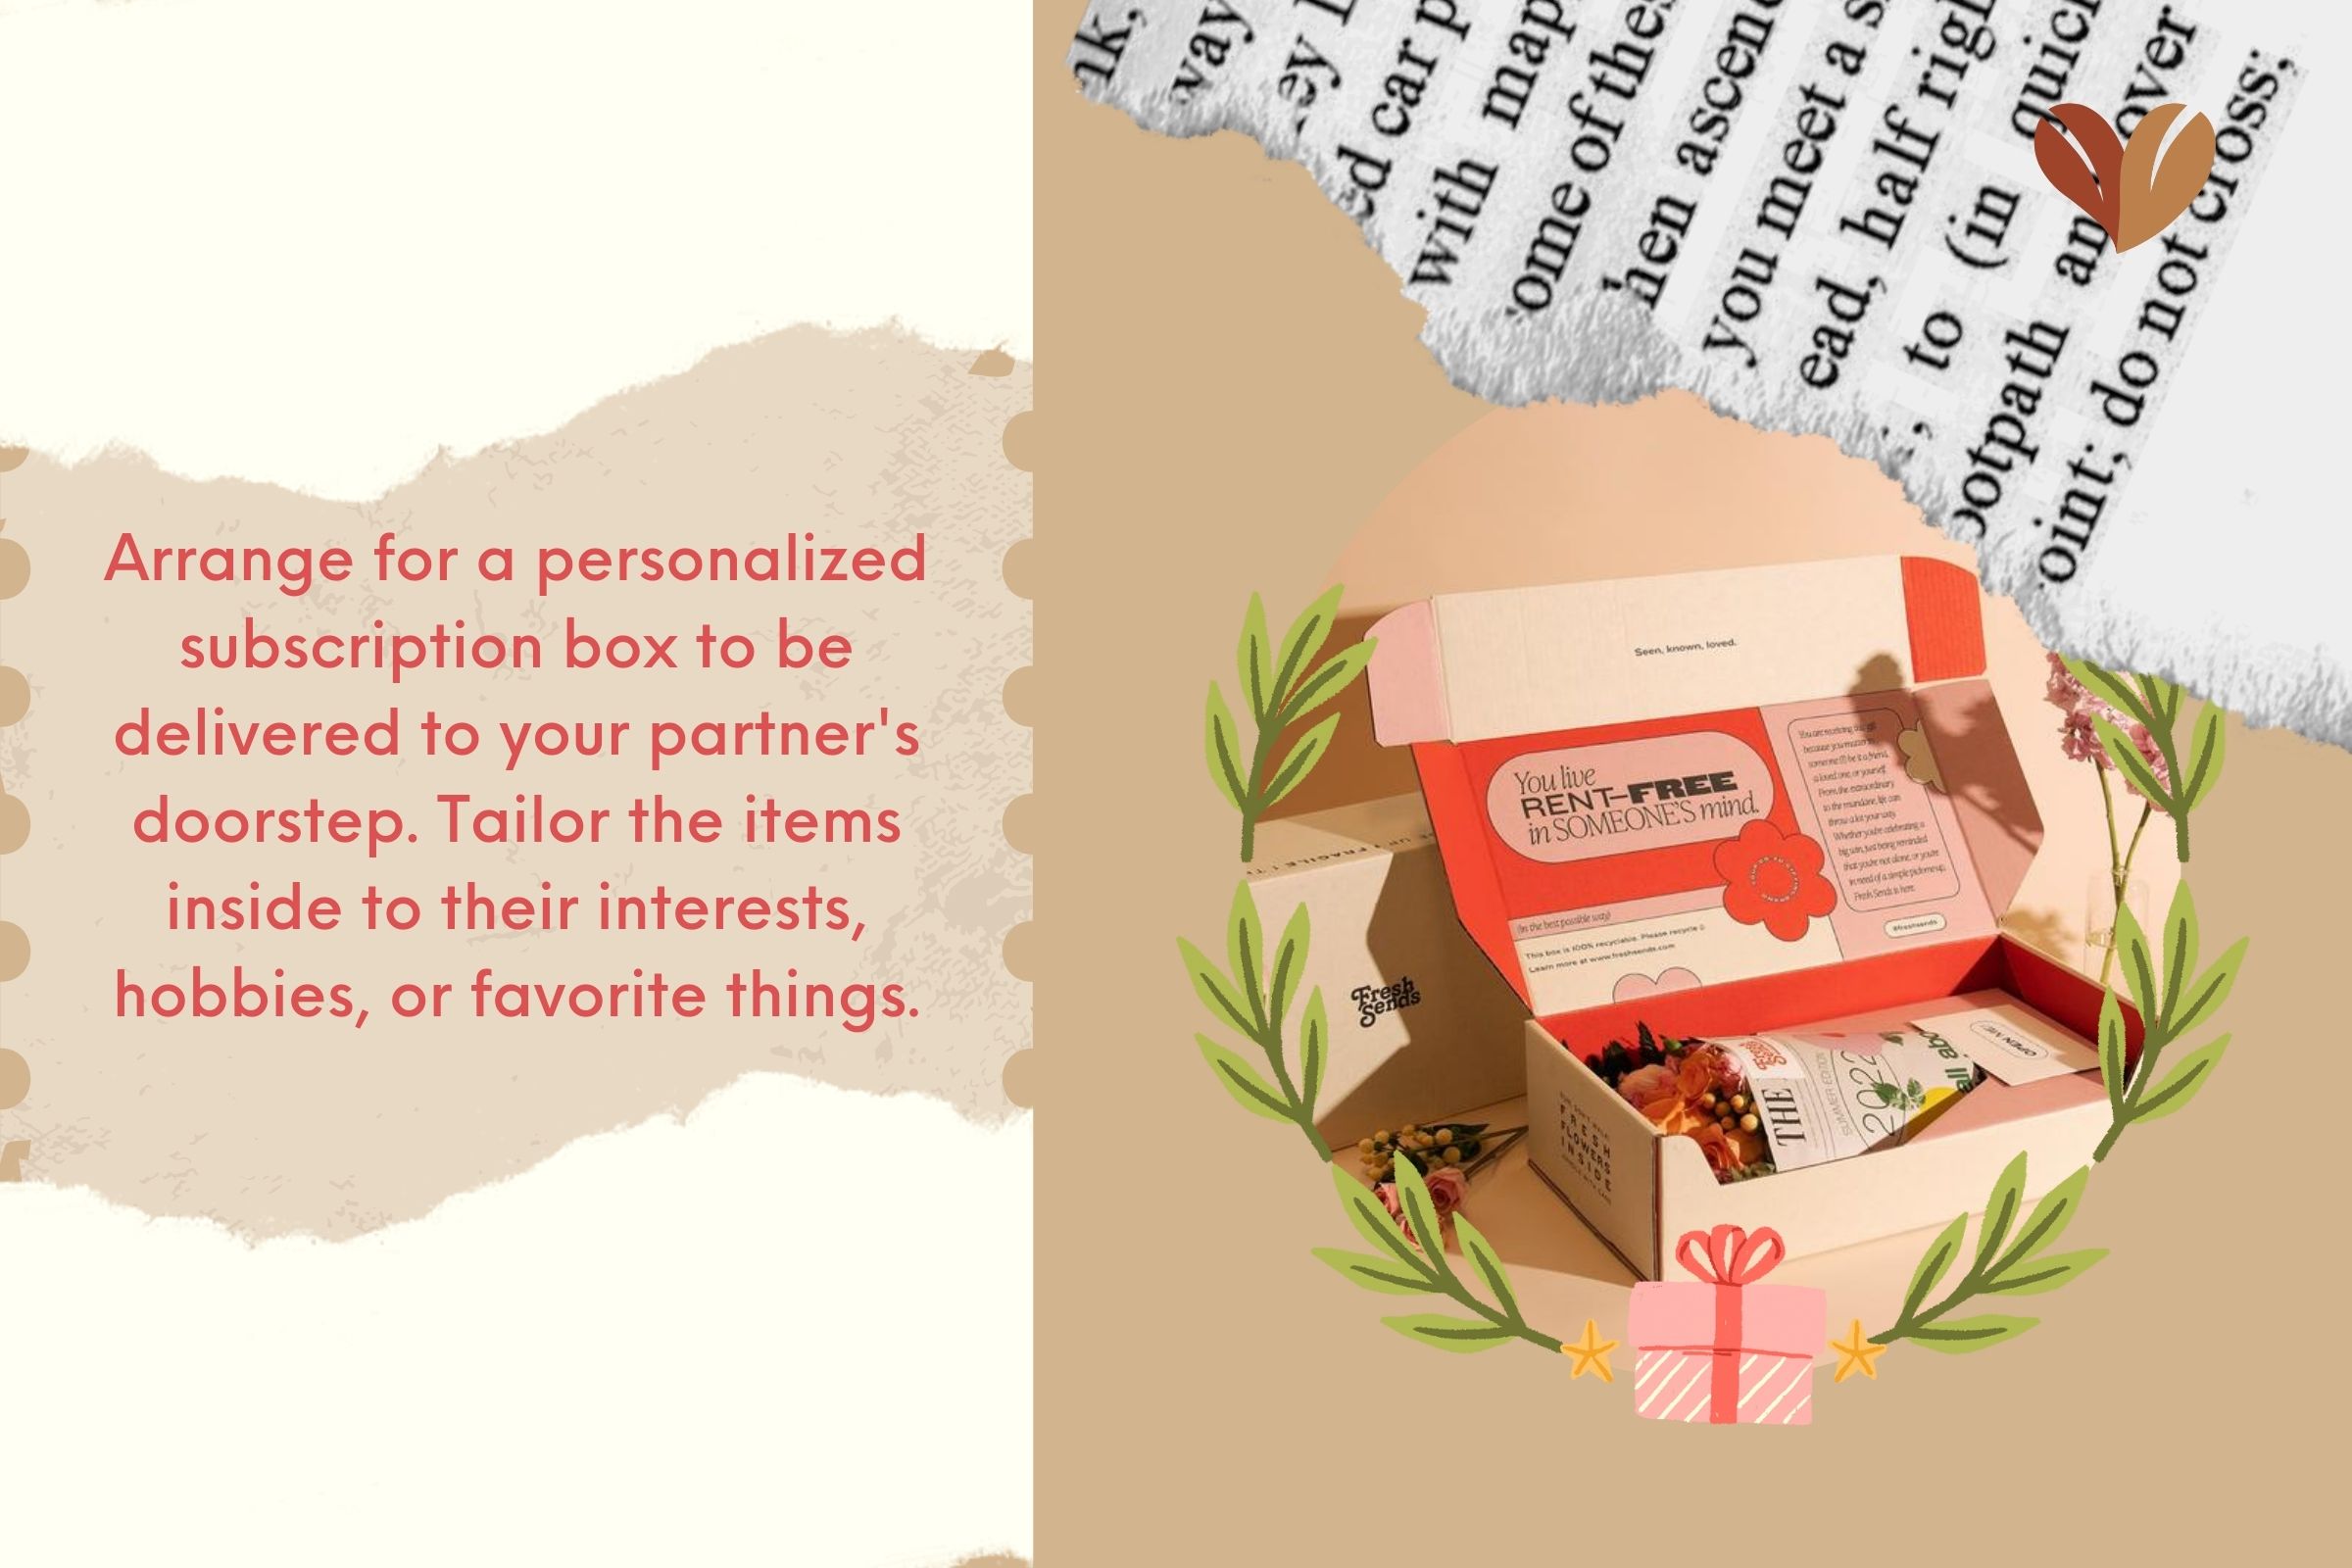 Surprise Subscription Box is a gift that brings many surprises to the relationship